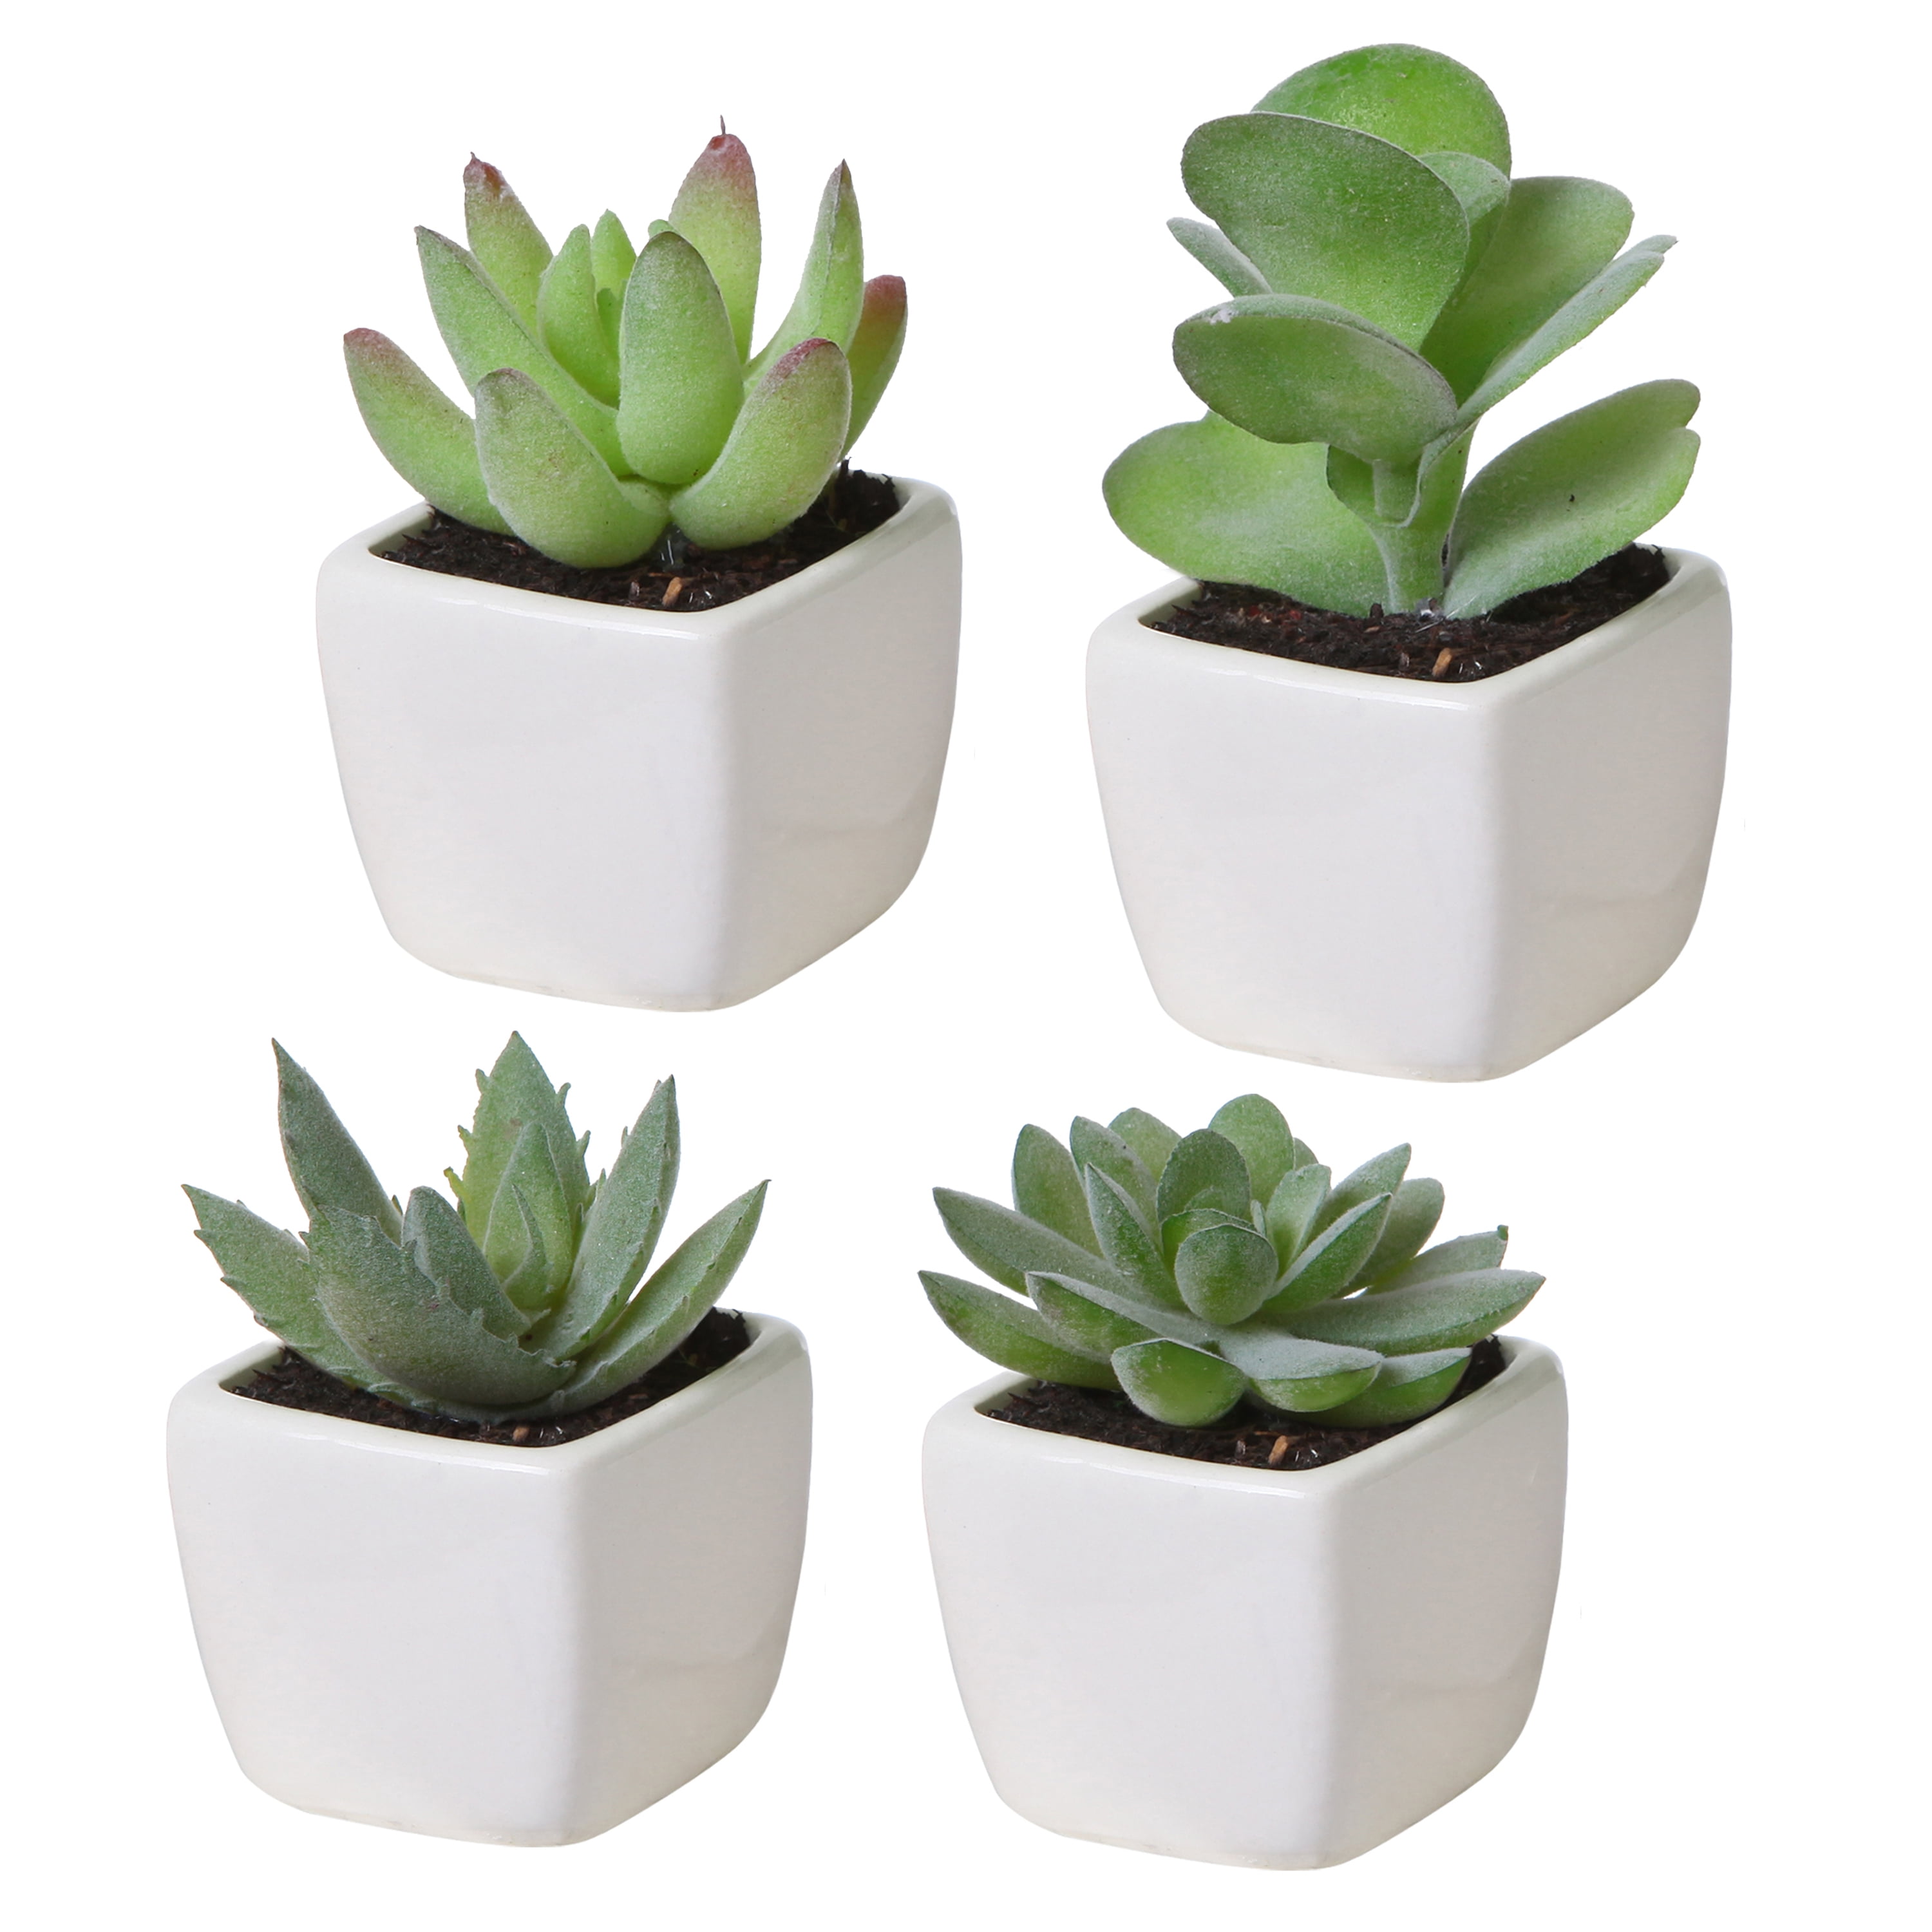 Set of 3 7" tall Assorted Succulent Cactus Plants with Off White Ceramic Pots 